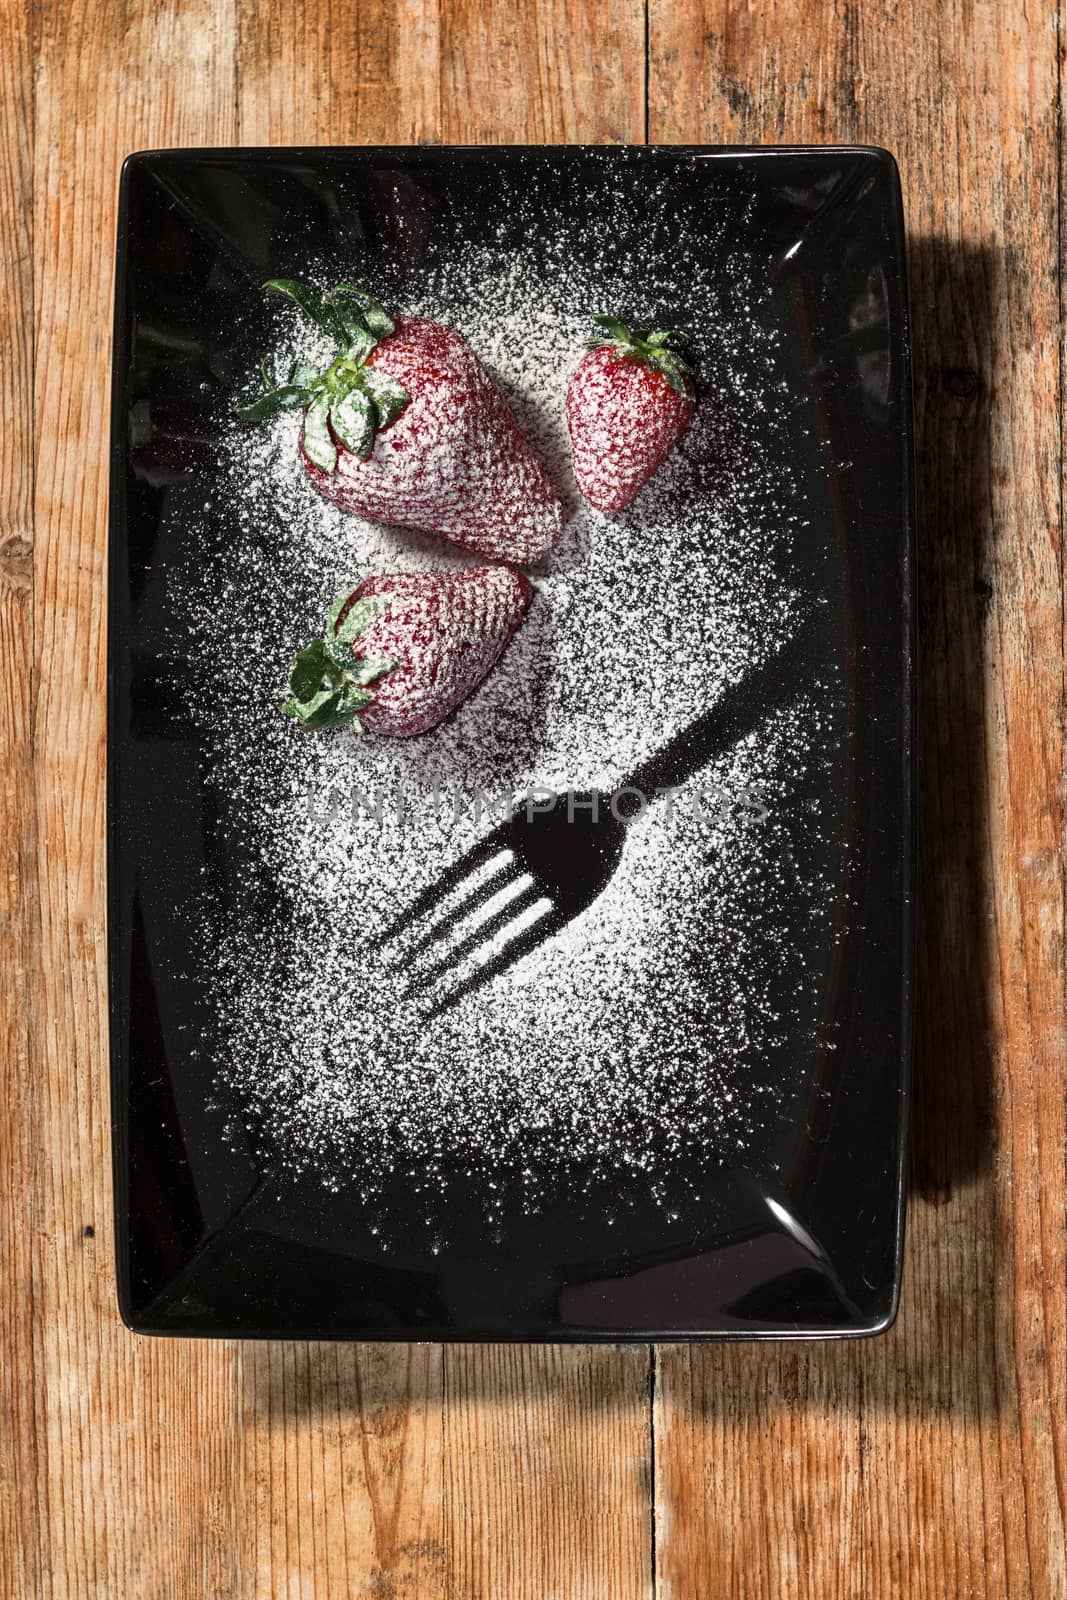 three strawberries sprinkled with sugar on a black plate and wooden base